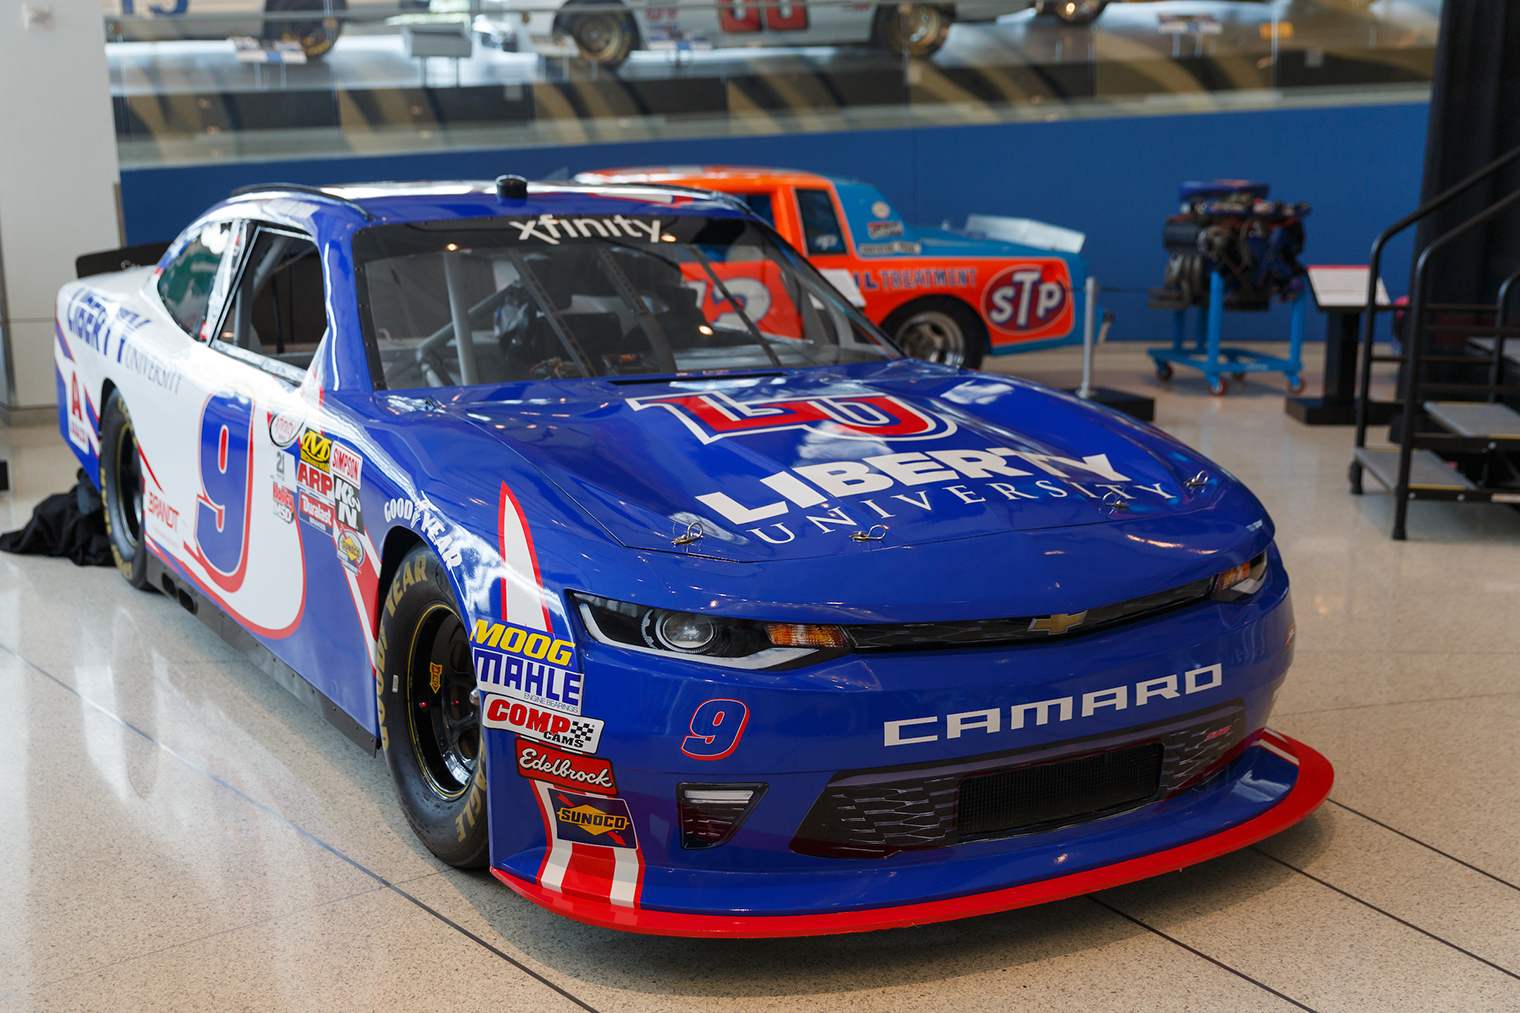 The 'throwback' car that Liberty University-sponsored No. 9 Chevrolet Camaro driver William Byron will drive at the Sept. 2 Xfinity Series race at Darlington, S.C., was revealed on Aug. 2.